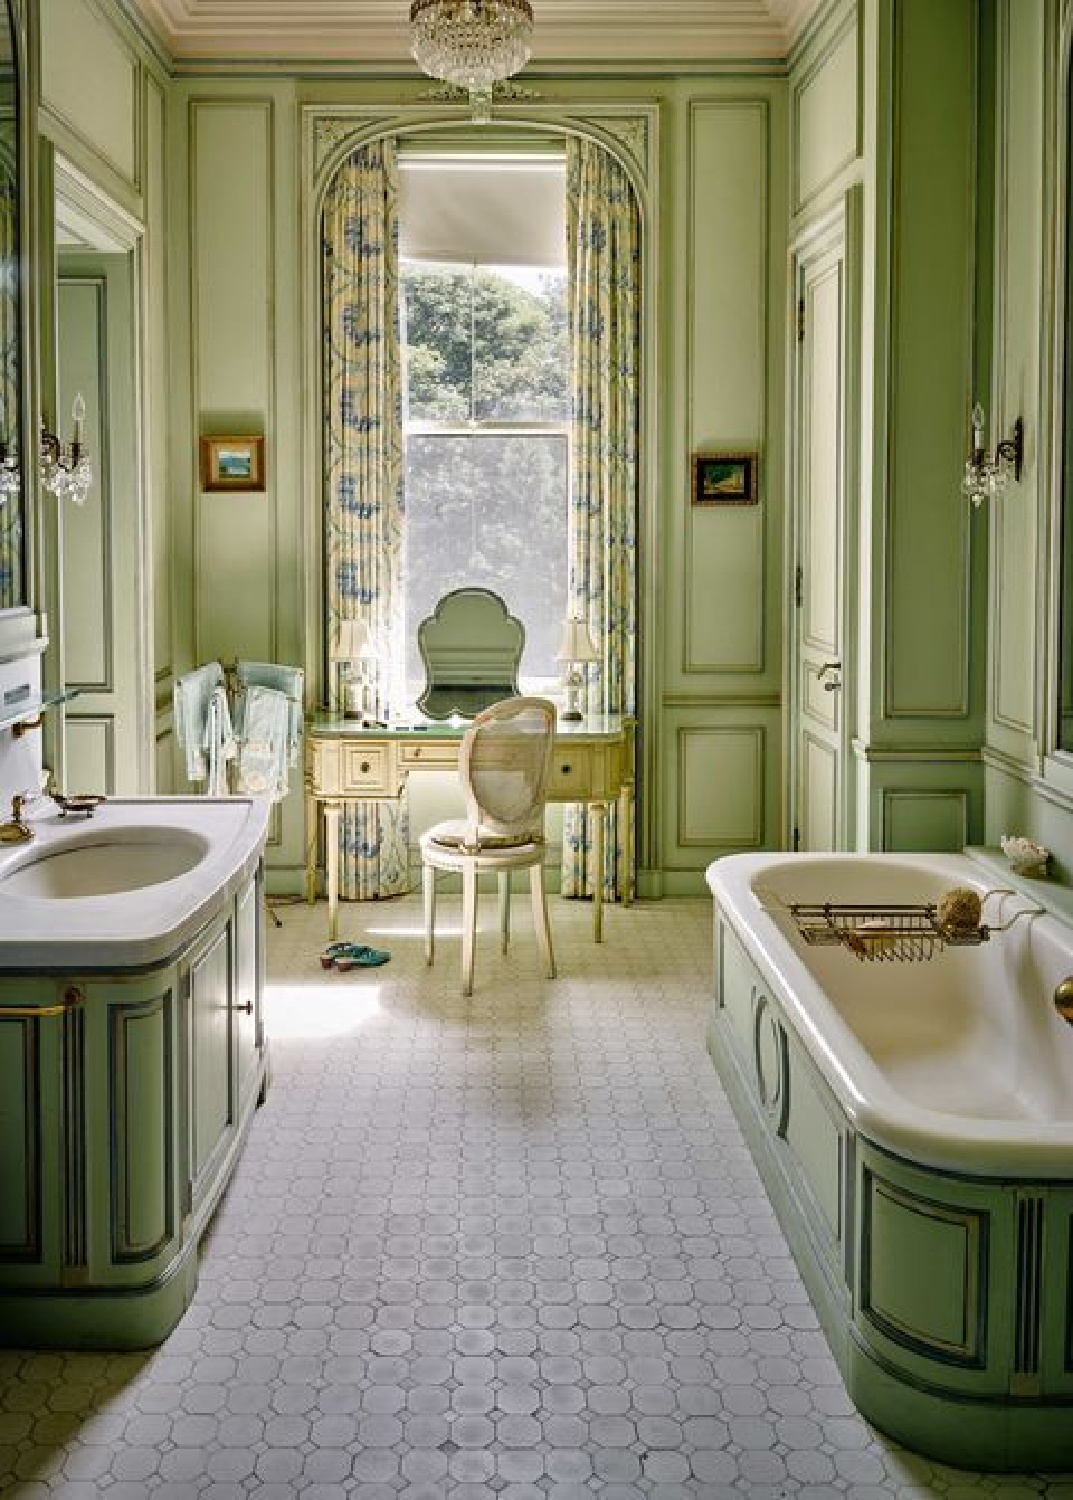 Elegant sage green French chateau bathroom in an exquisite Newport mansion. #sagegreen #frenchchateau